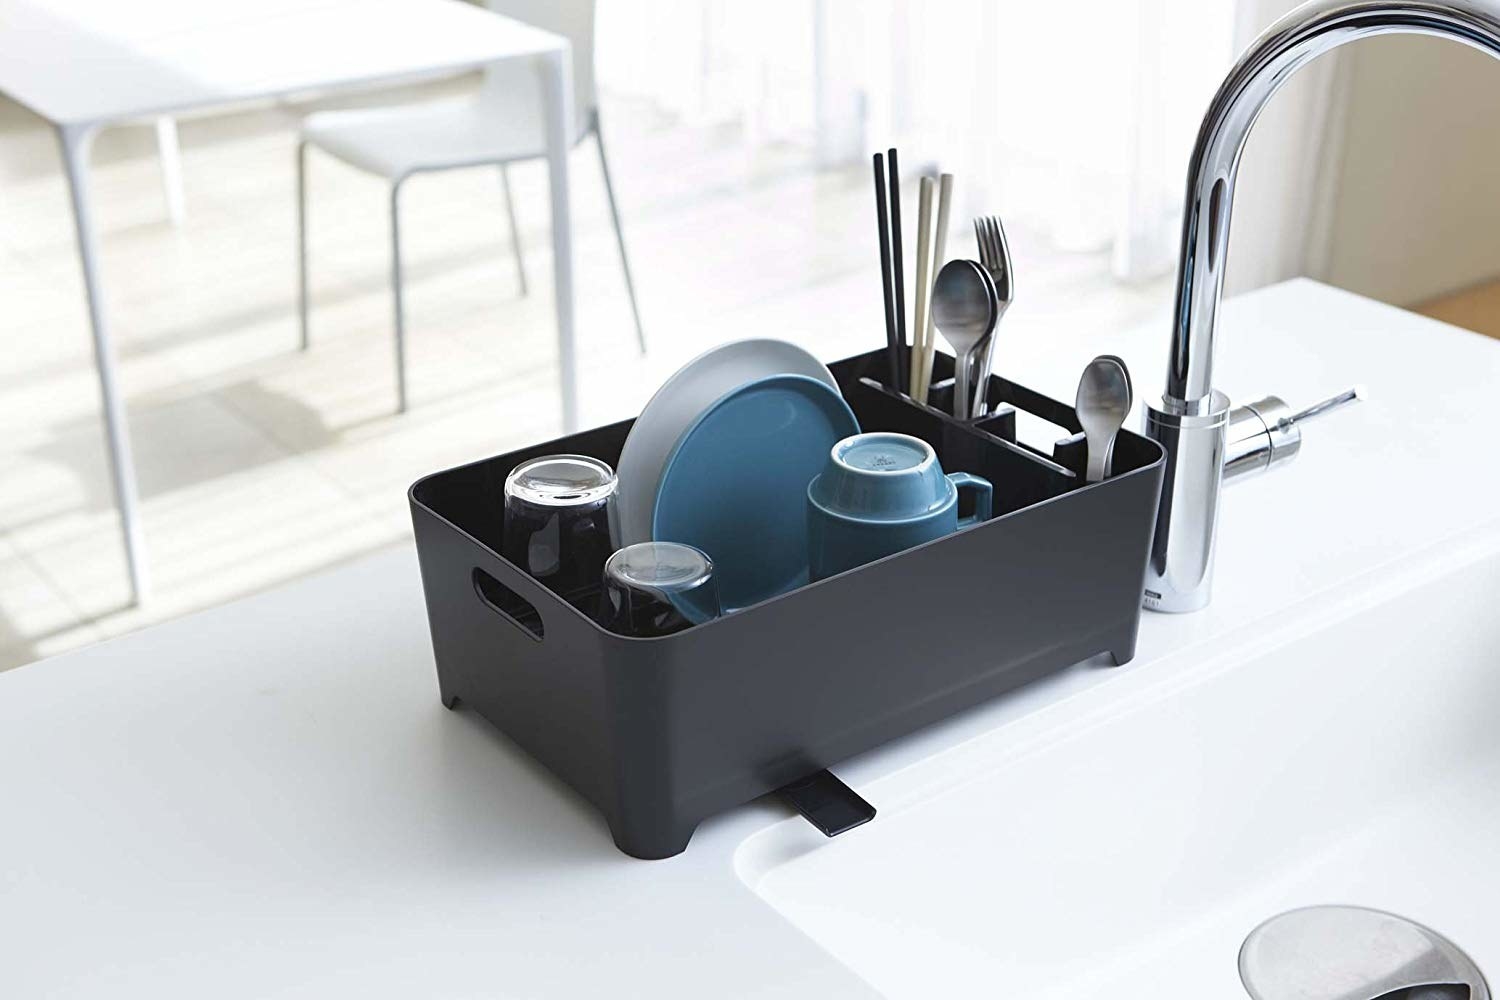 The dish draining rack in a black color